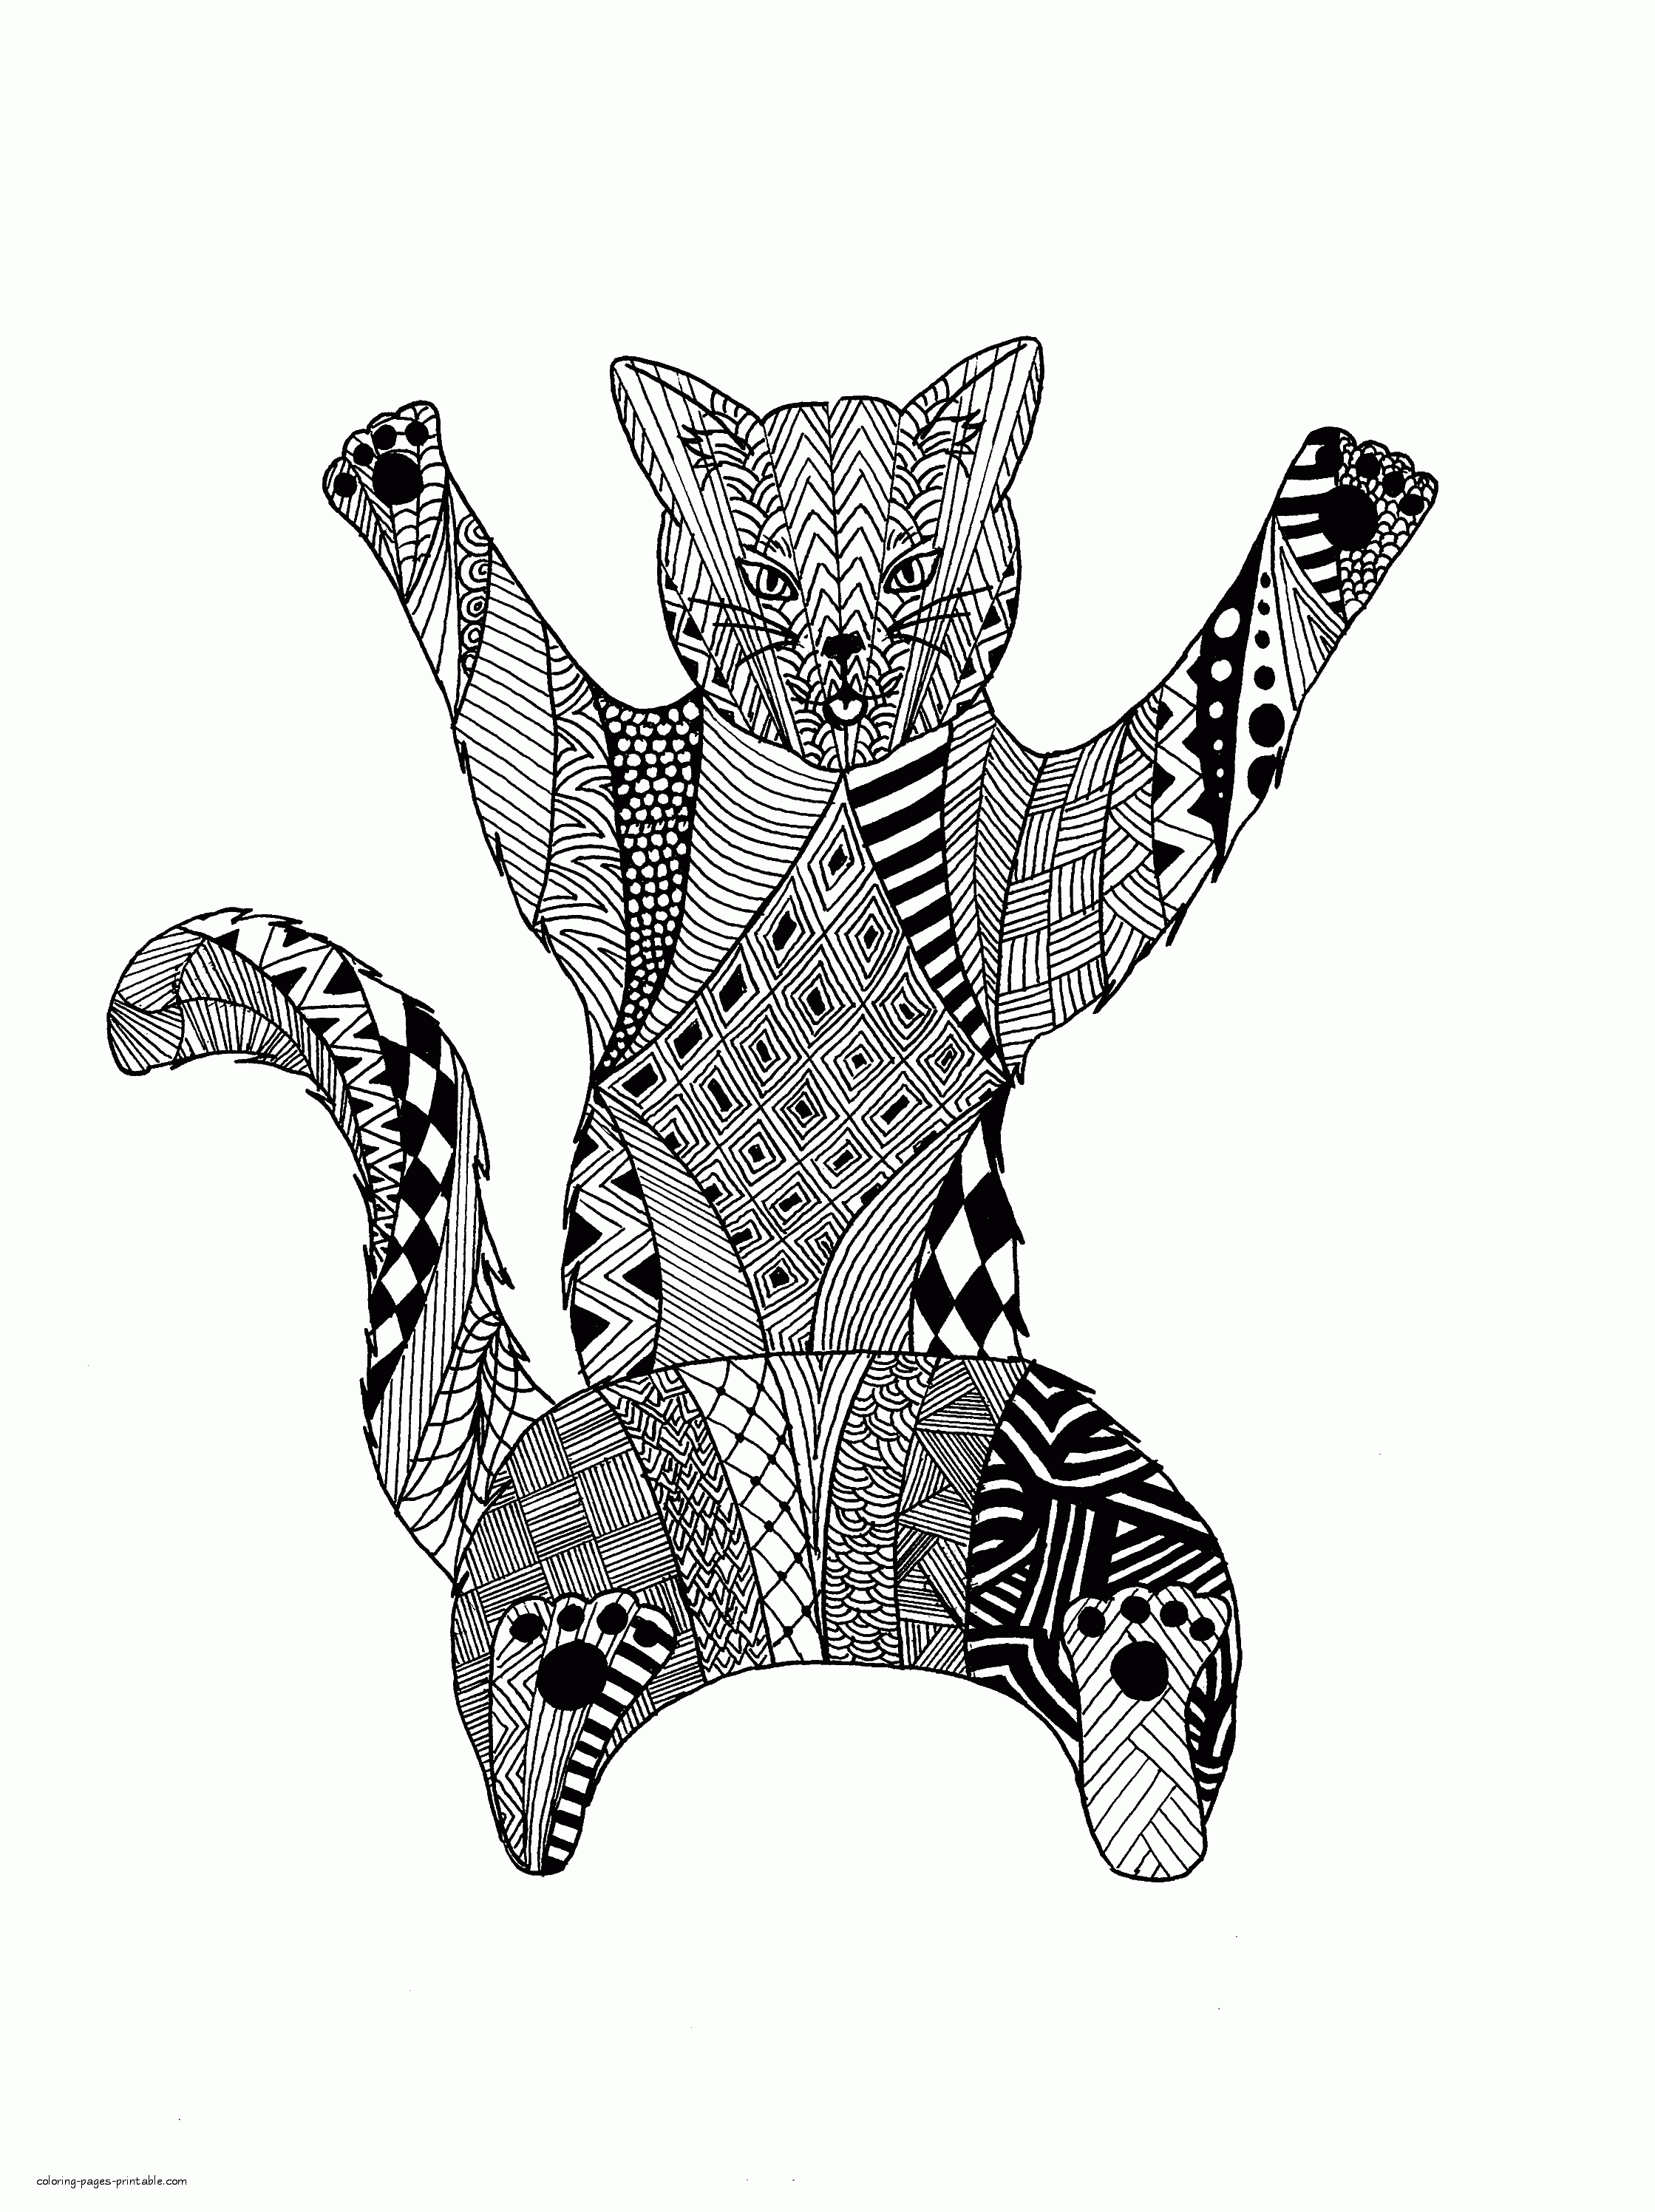 Detailed Animal Coloring Pages For Adults. Cat || COLORING-PAGES ...